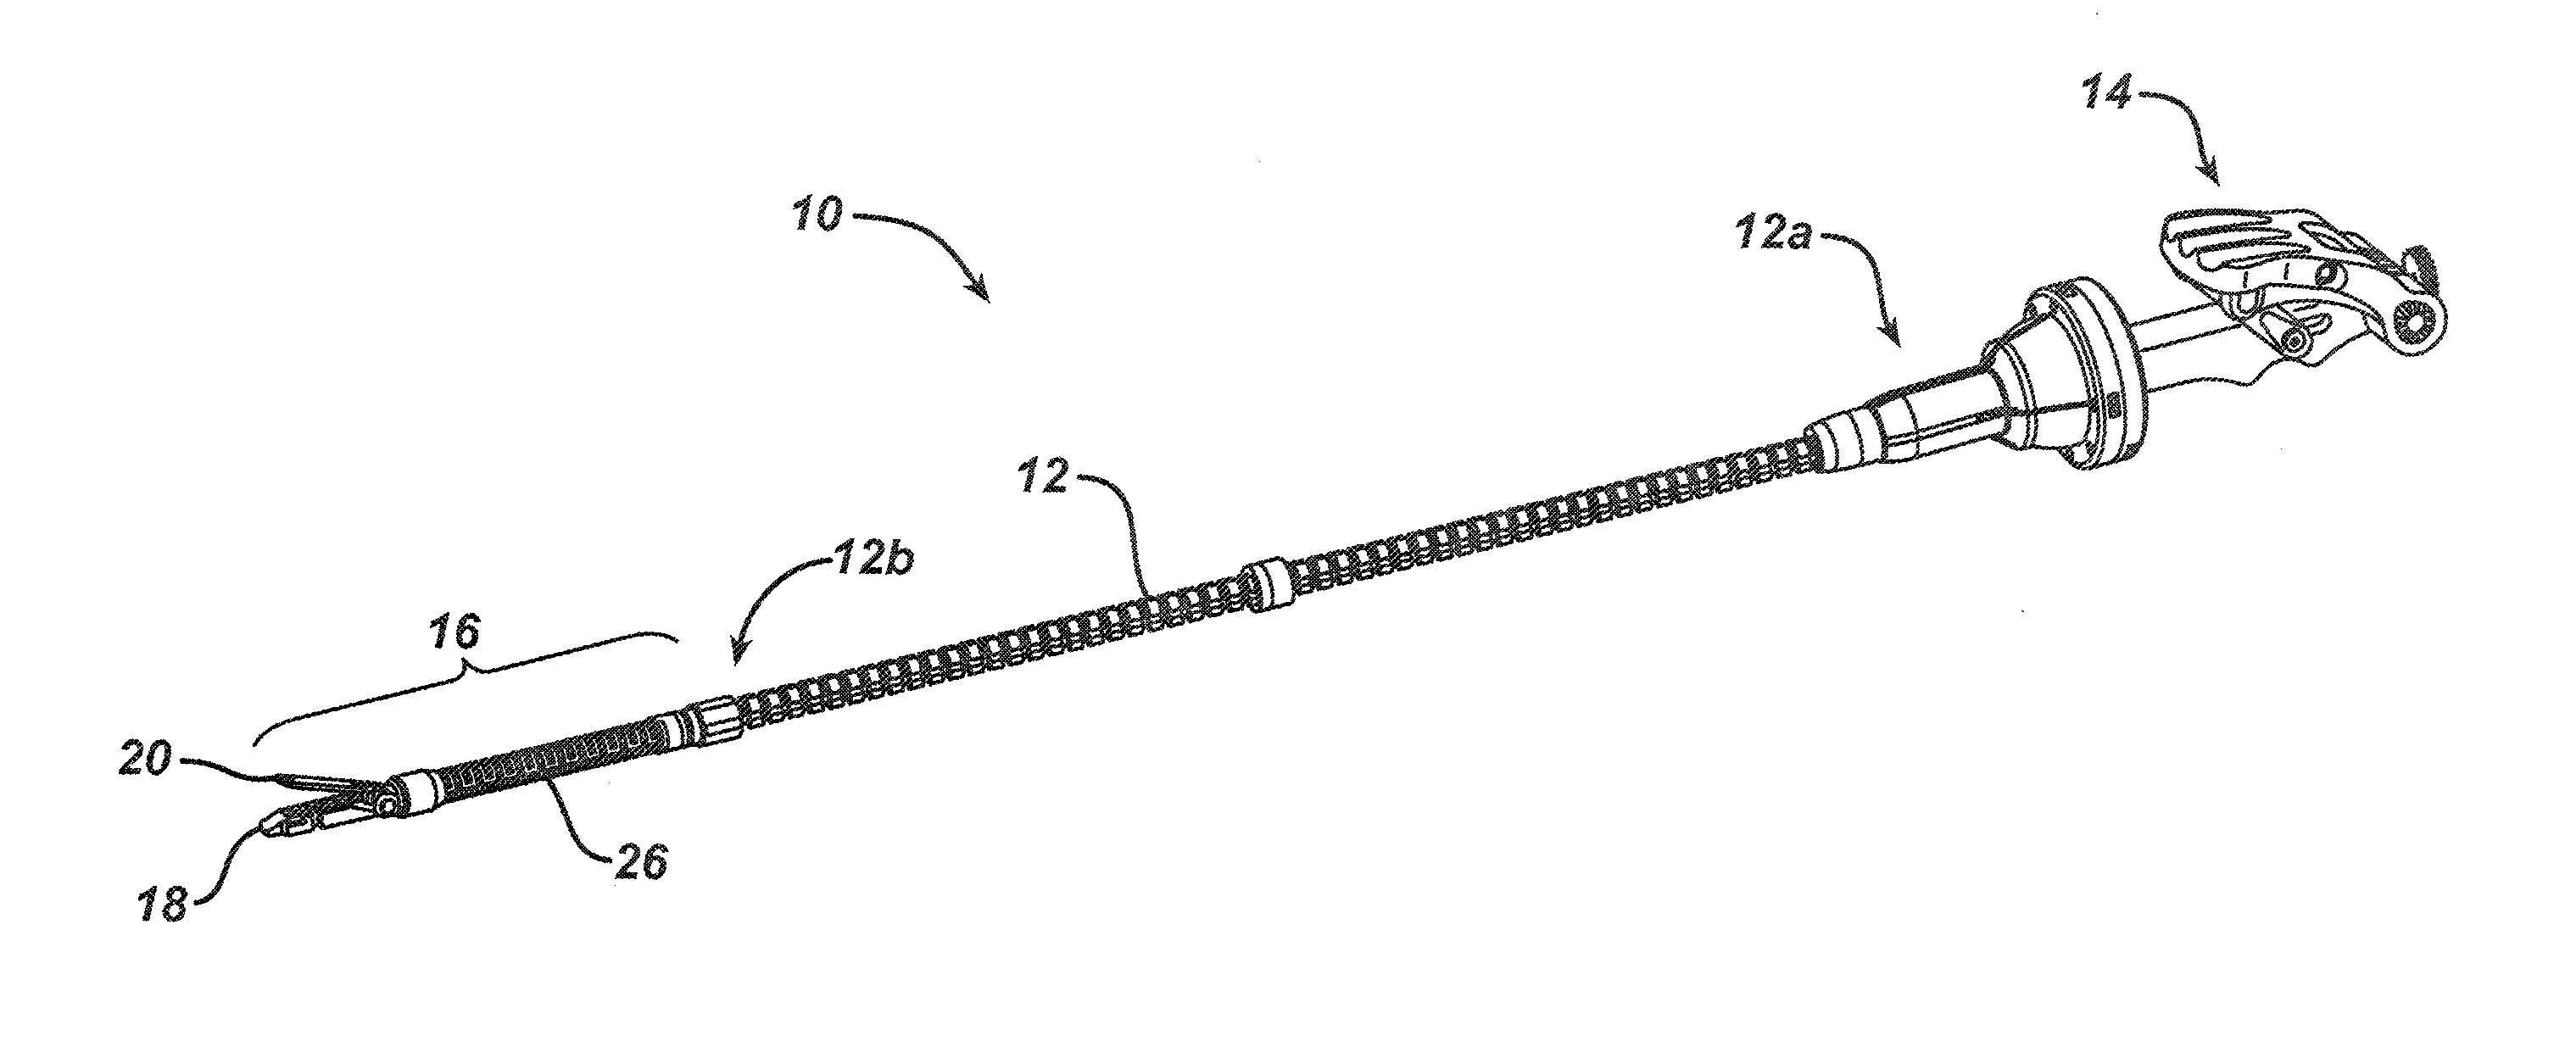 Robotically-controlled surgical instrument with selectively articulatable end effector